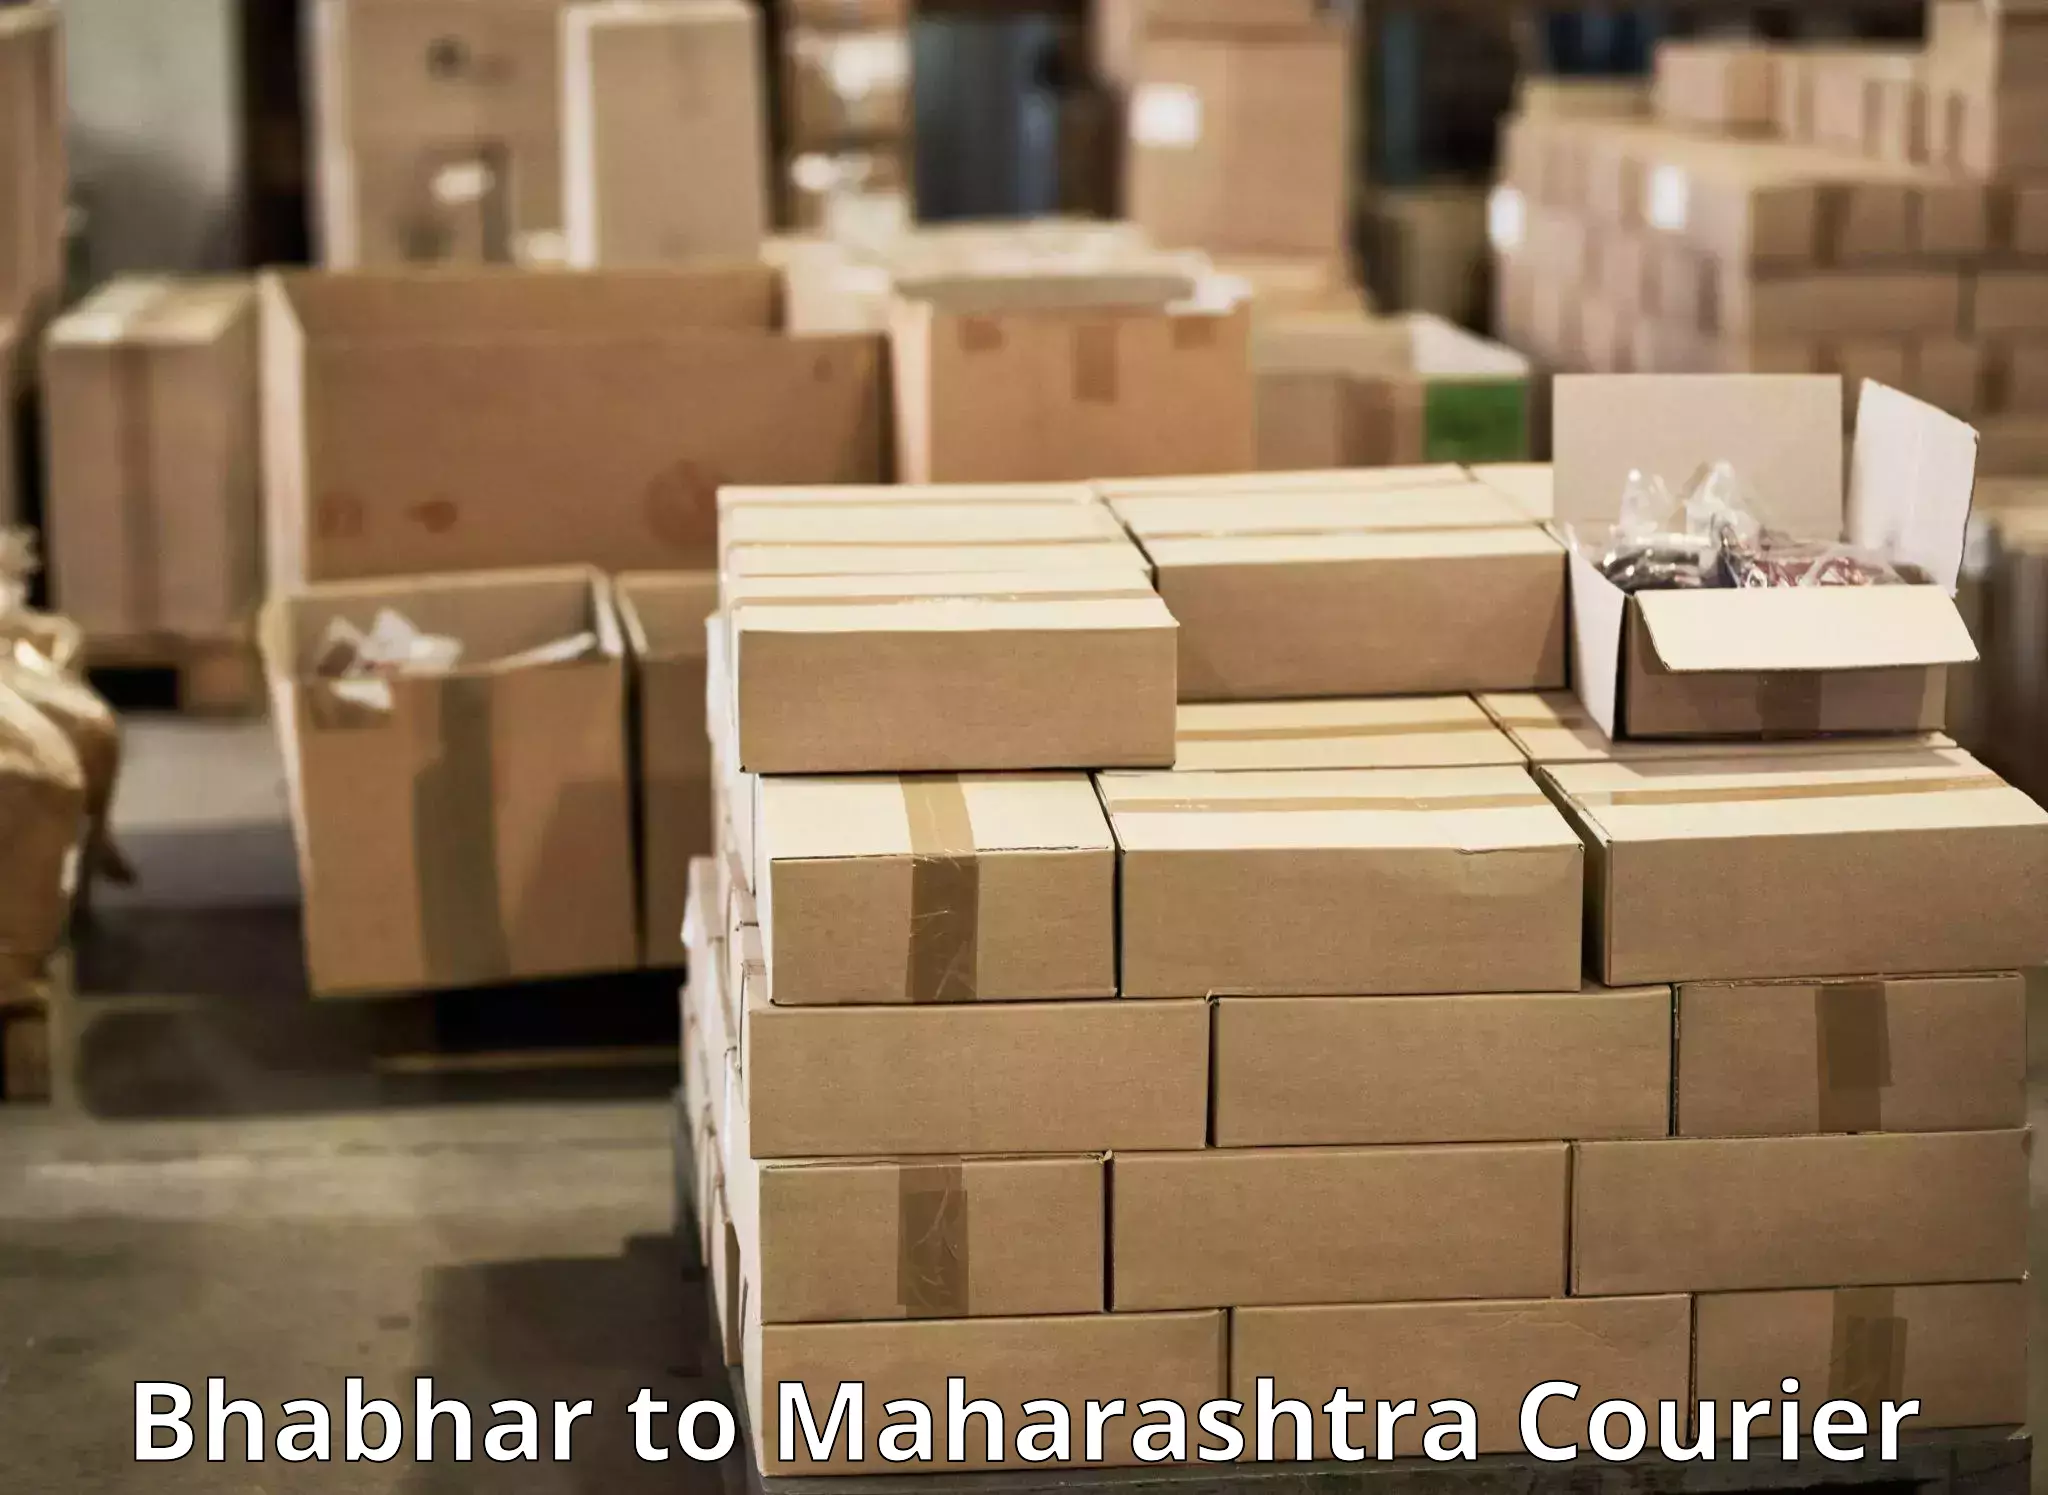 Multi-national courier services Bhabhar to Koregaon